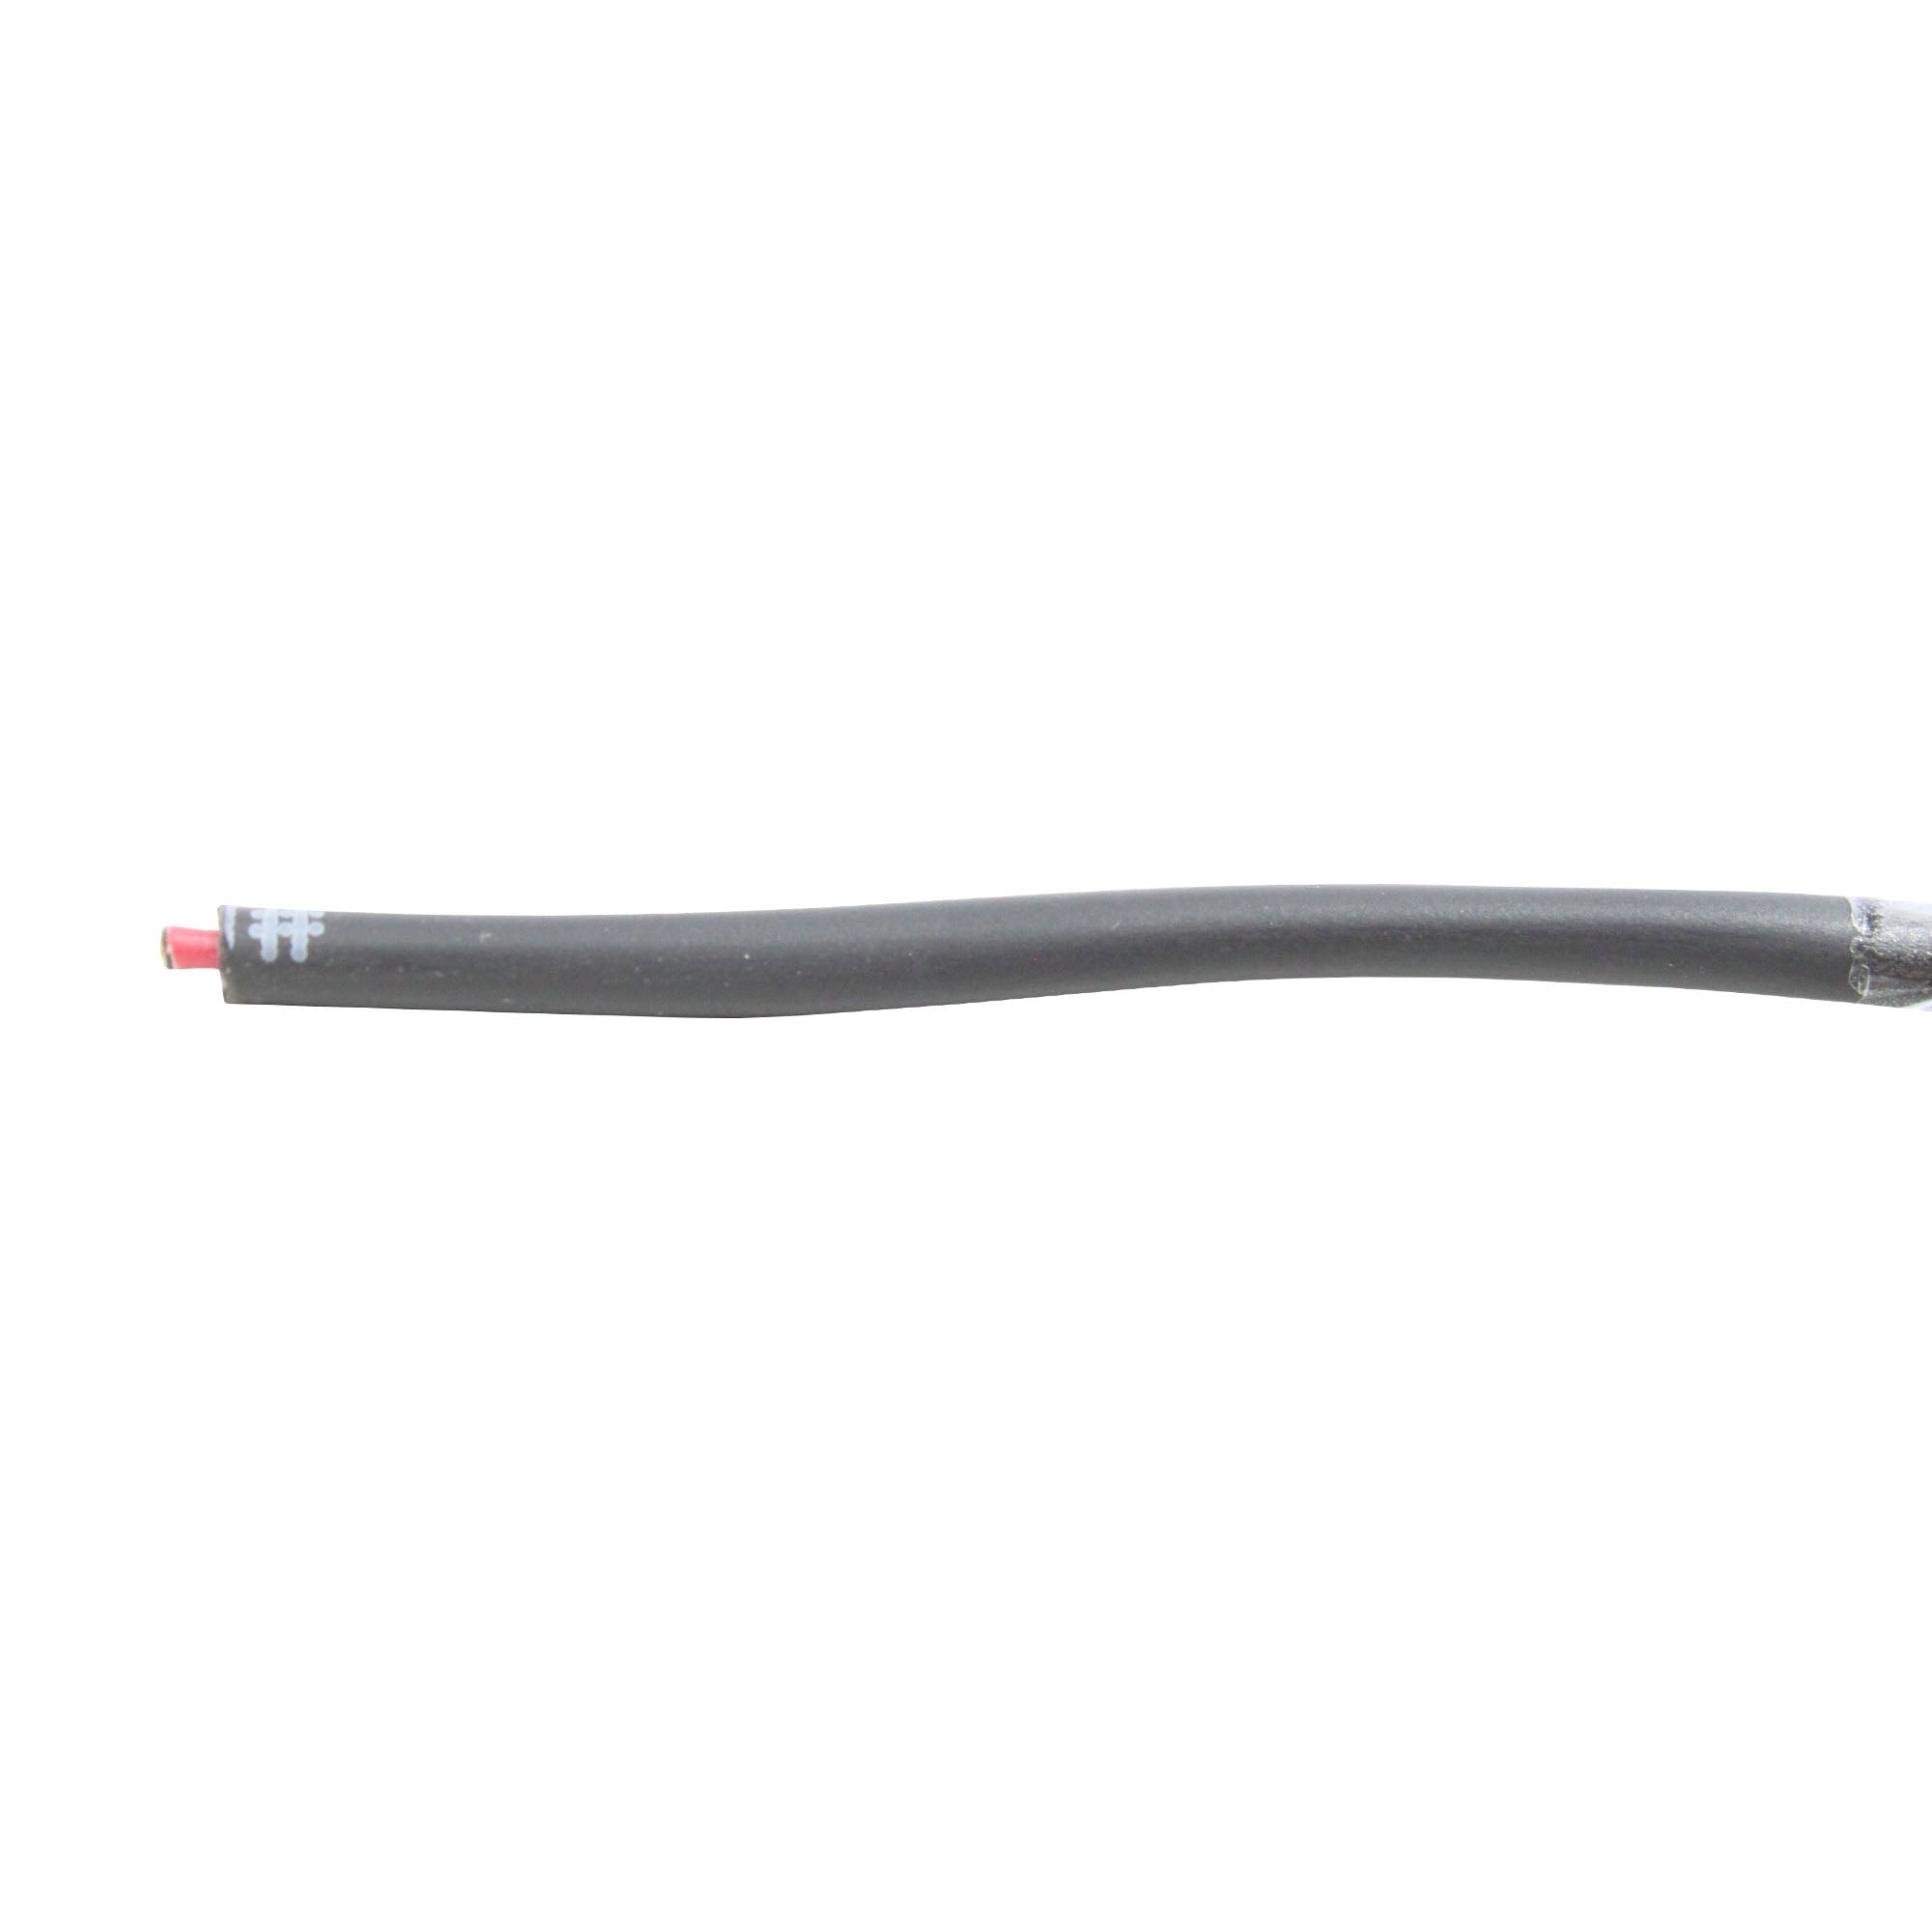 FASTER CABLE, FASTER CABLE P222C-BLK 22AWG 2C, 22/2 STR CMP PLENUM CONTROL CABLE, BLACK, 1000'